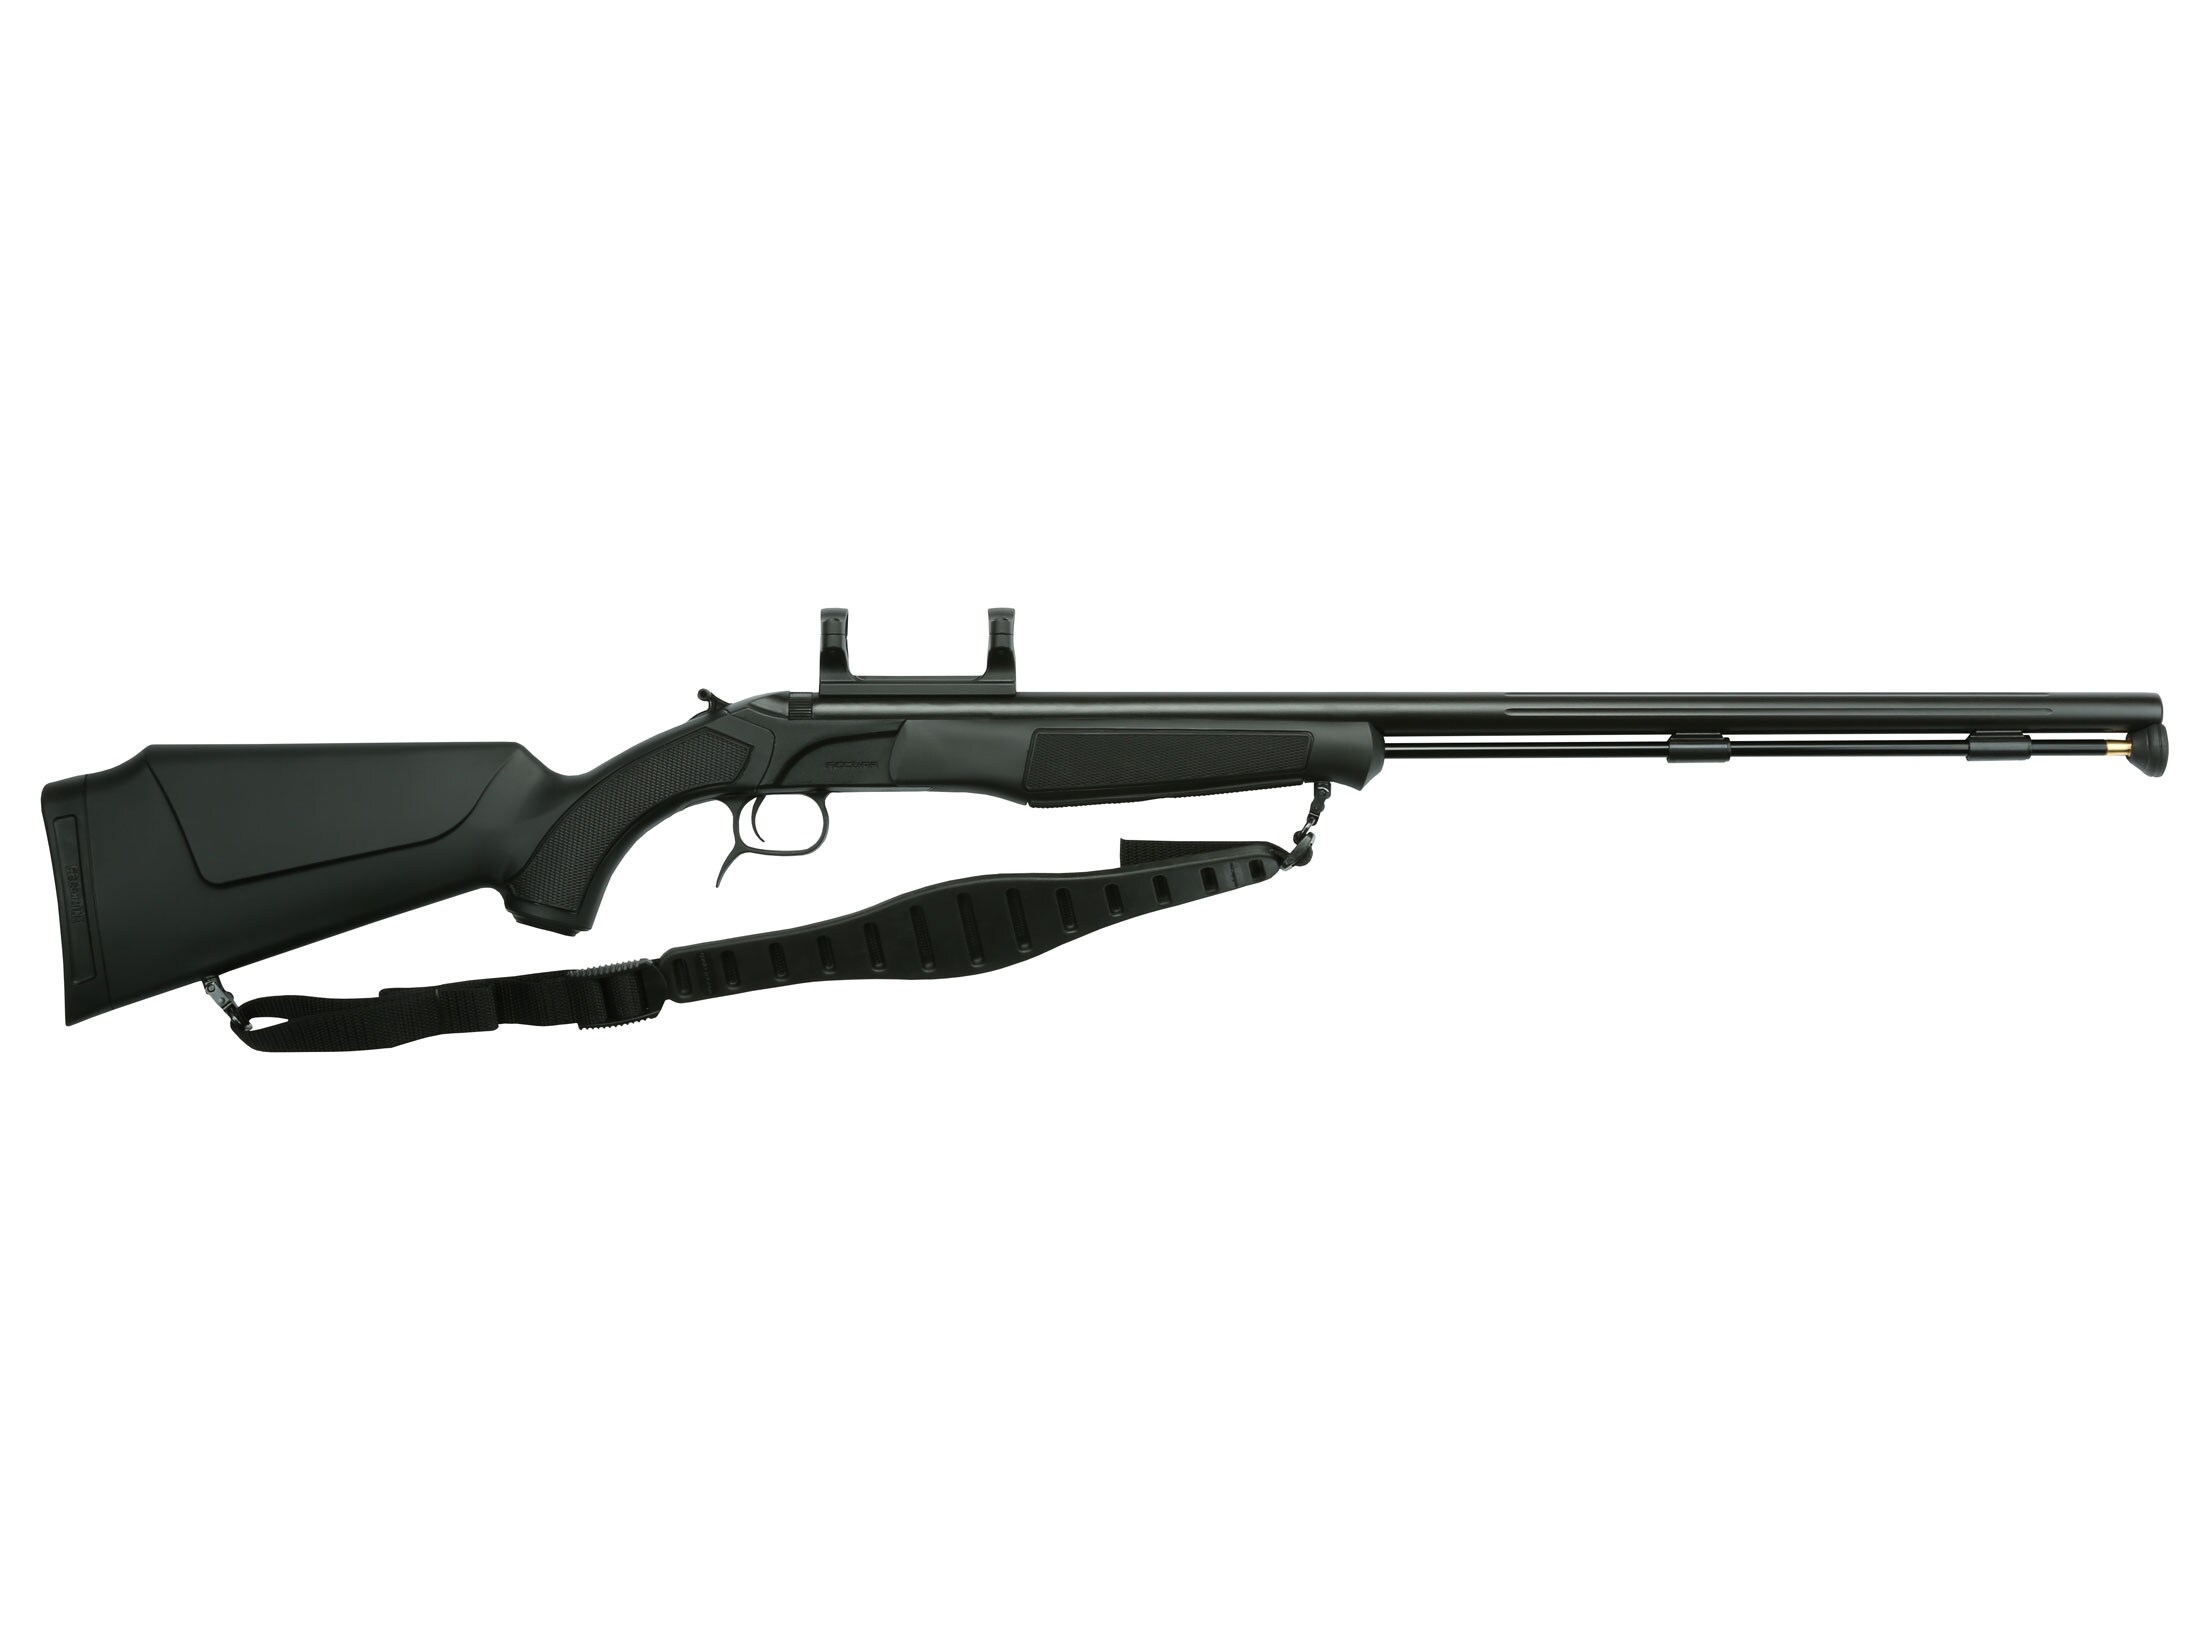 Image of CVA Accura PR Muzzleloading Rifle with Dead-On Scope Mount 50 Caliber 28" Fluted Nitride Stainless Steel Barrel Synthetic Stock